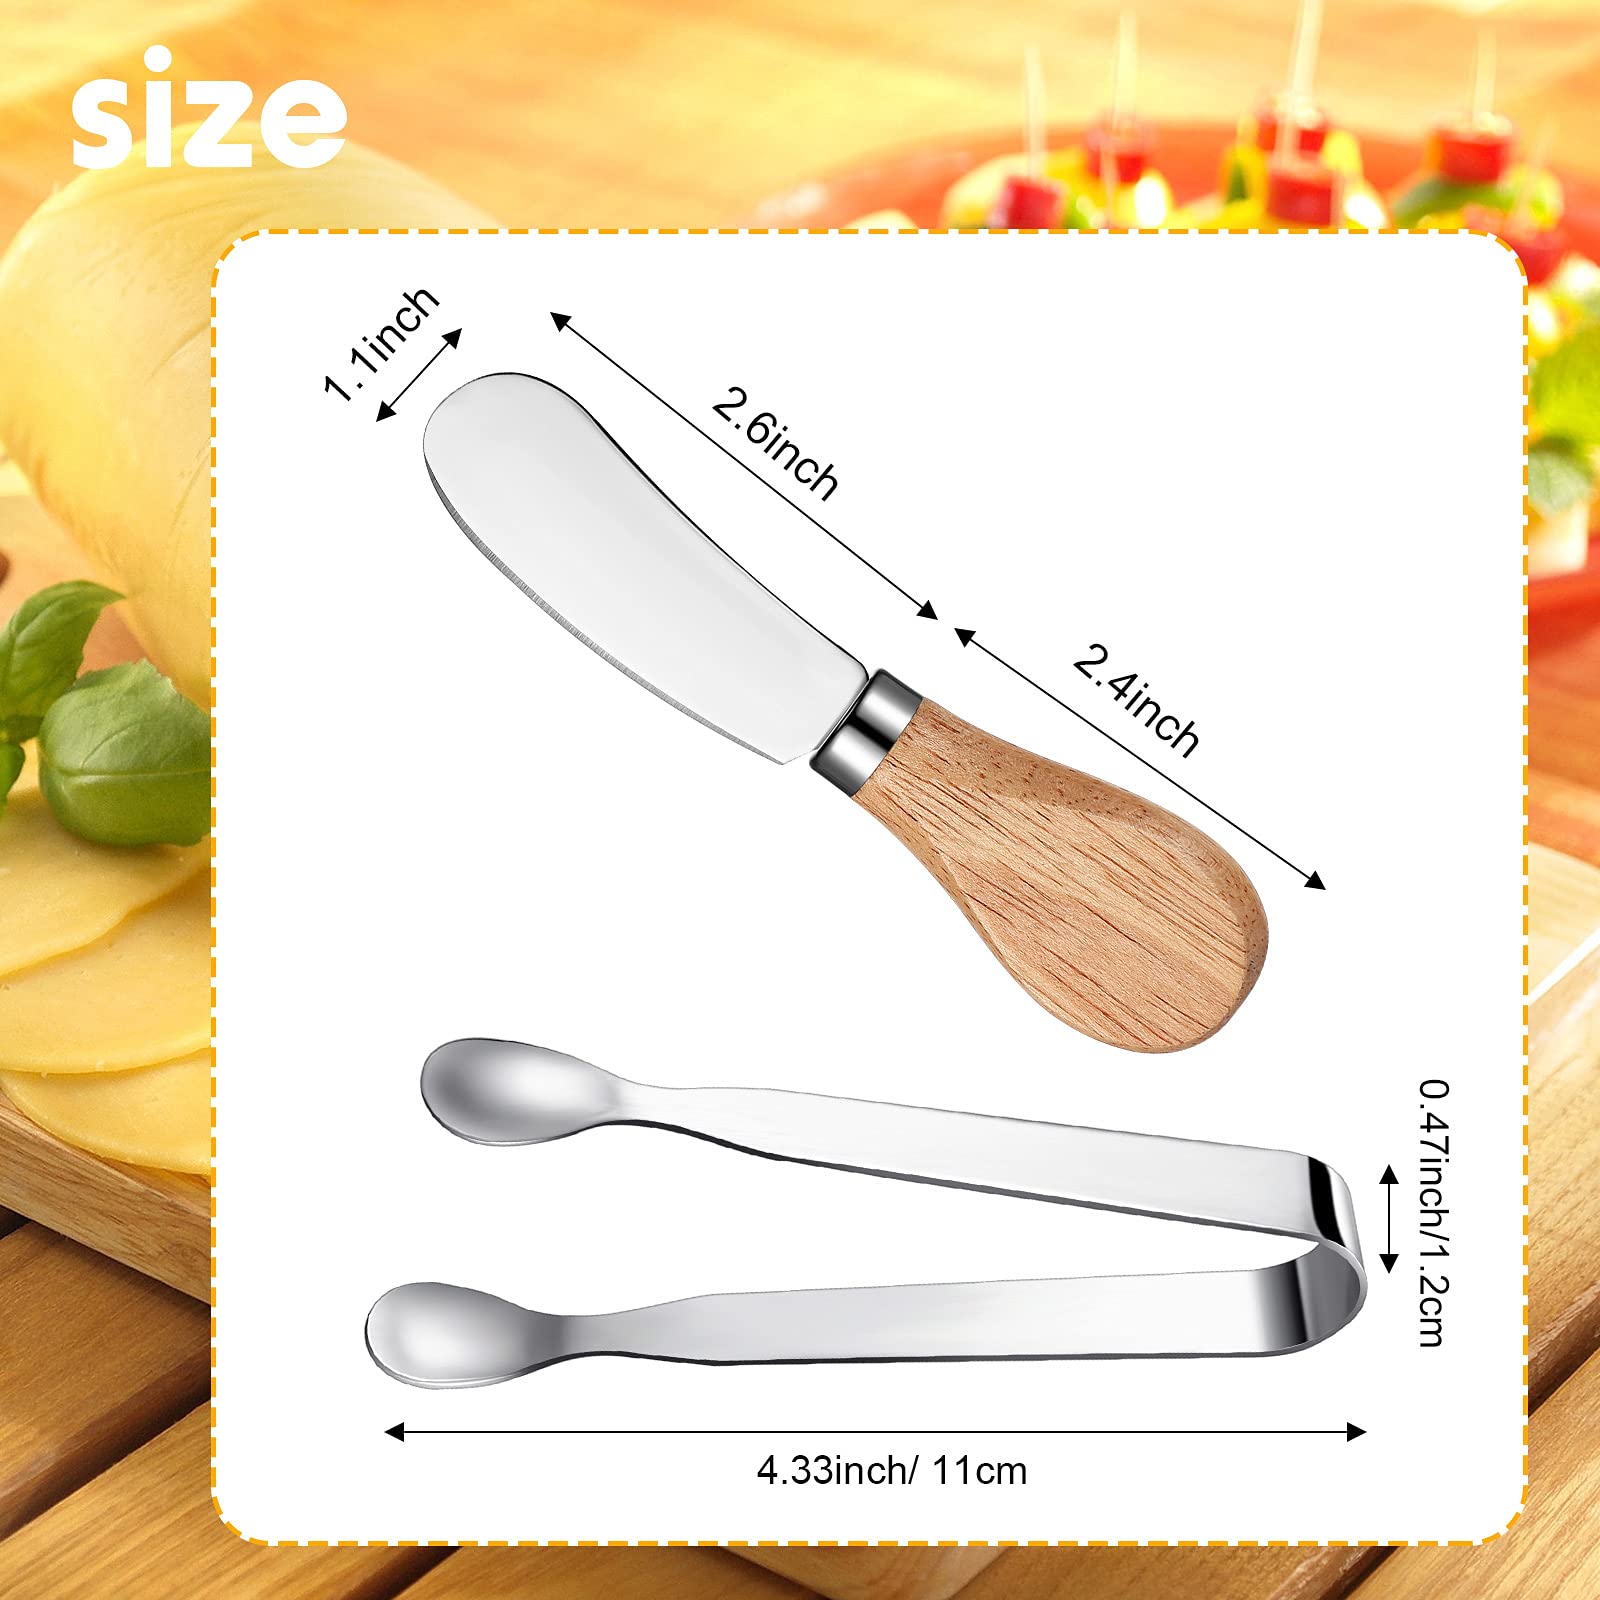 5 Pieces Serving Utensils Including 3 Pieces Butter Cheese Spreader 2 Pieces Sugar Tongs Ice Tongs Kitchen Tongs Stainless Steel Serving Tongs Sugar Cube Tongs for Tea Party Desserts Coffee Bar